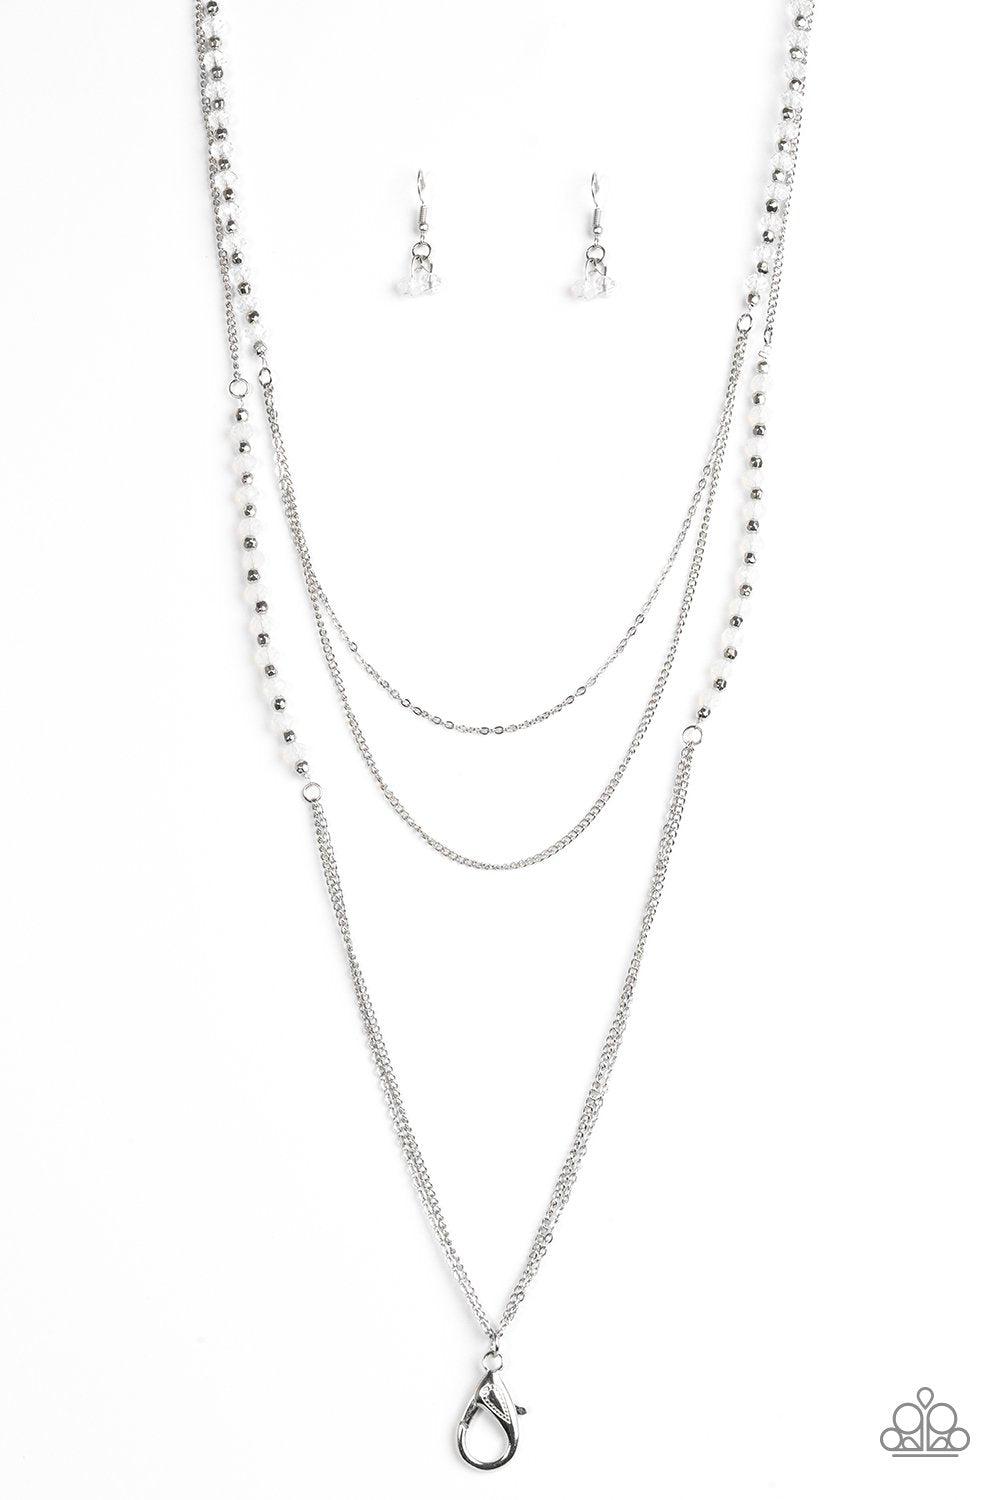 Shimmer Showdown White Lanyard Necklace - Paparazzi Accessories-CarasShop.com - $5 Jewelry by Cara Jewels